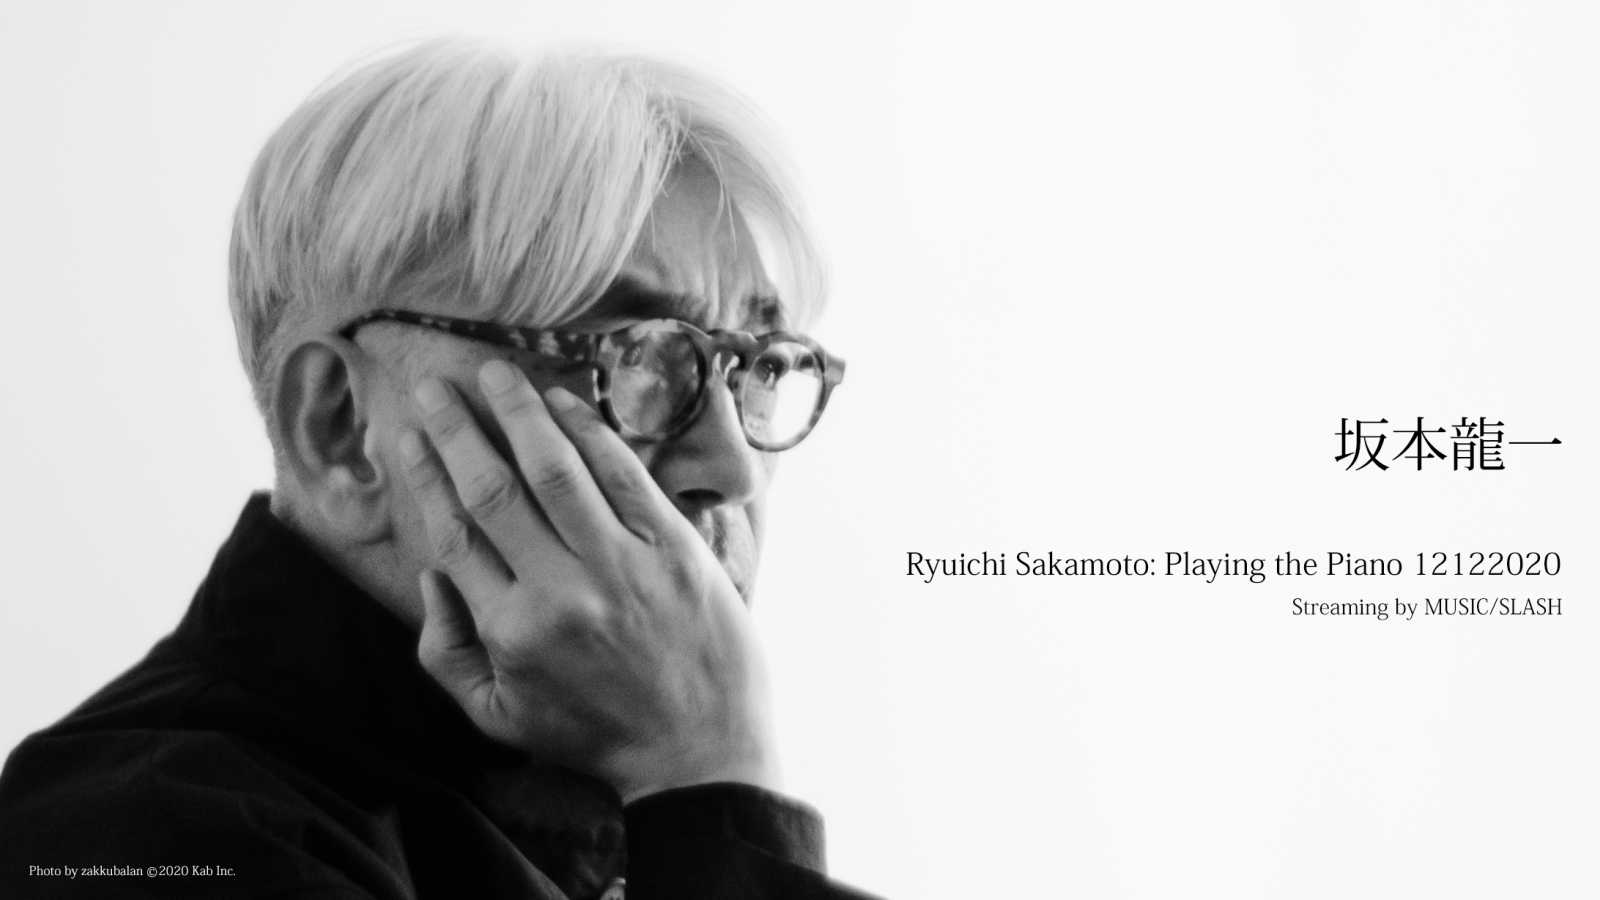 Ryuichi Sakamoto to Premiere Past Shows on YouTube Ahead of Live Streaming Concert  © Ryuichi Sakamoto. All rights reserved.